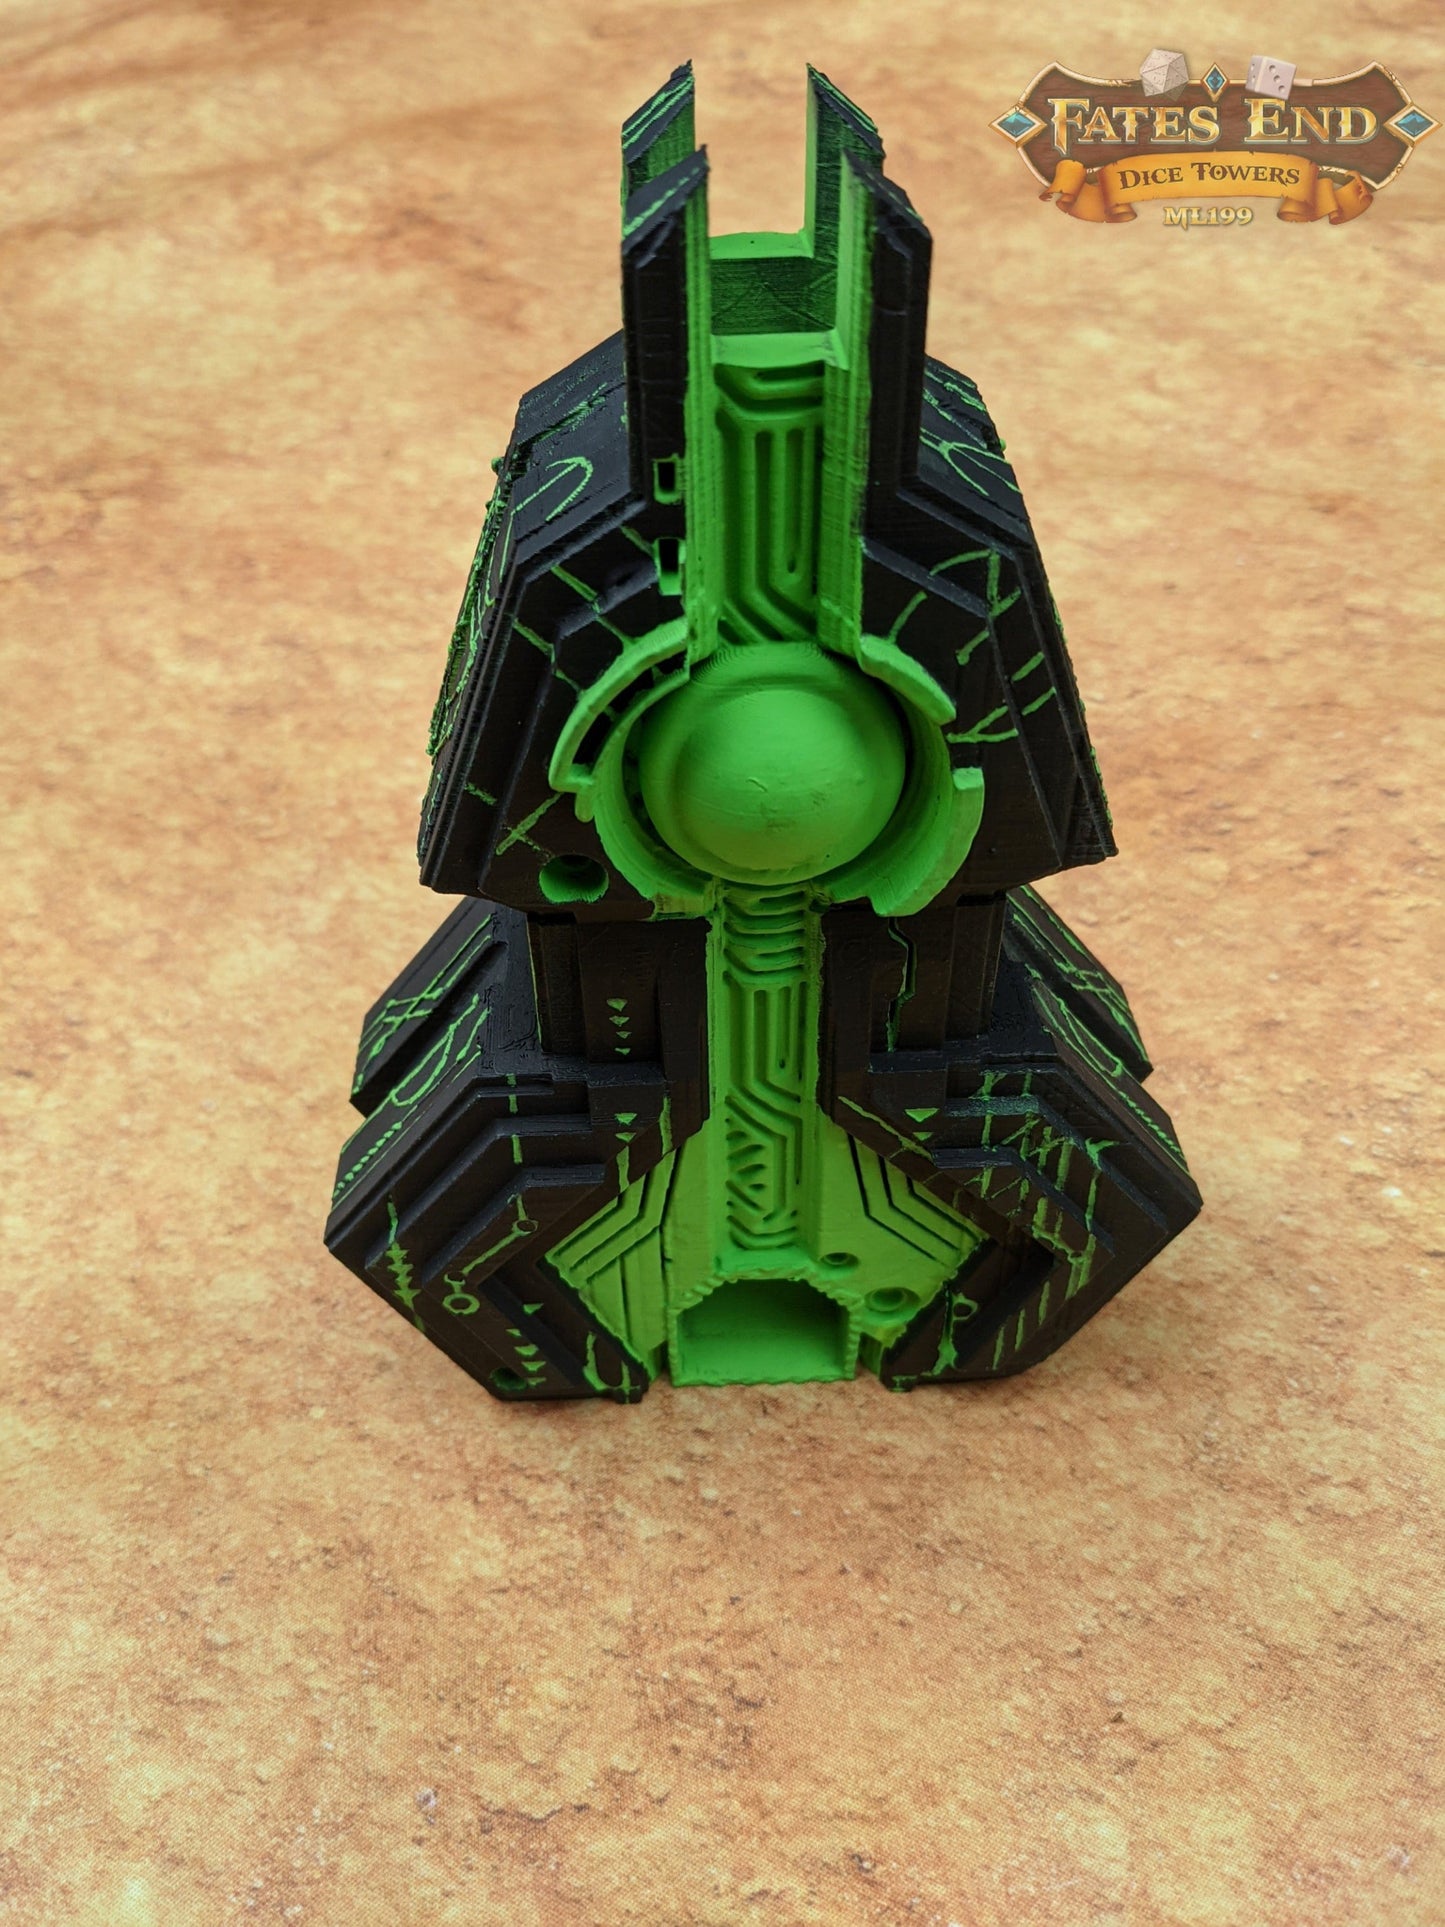 Obelisk 3D Printed Dice Tower - Fate's End Collection - Channel Ancient Powers and Timeless Mysteries with Every Monumental Roll.